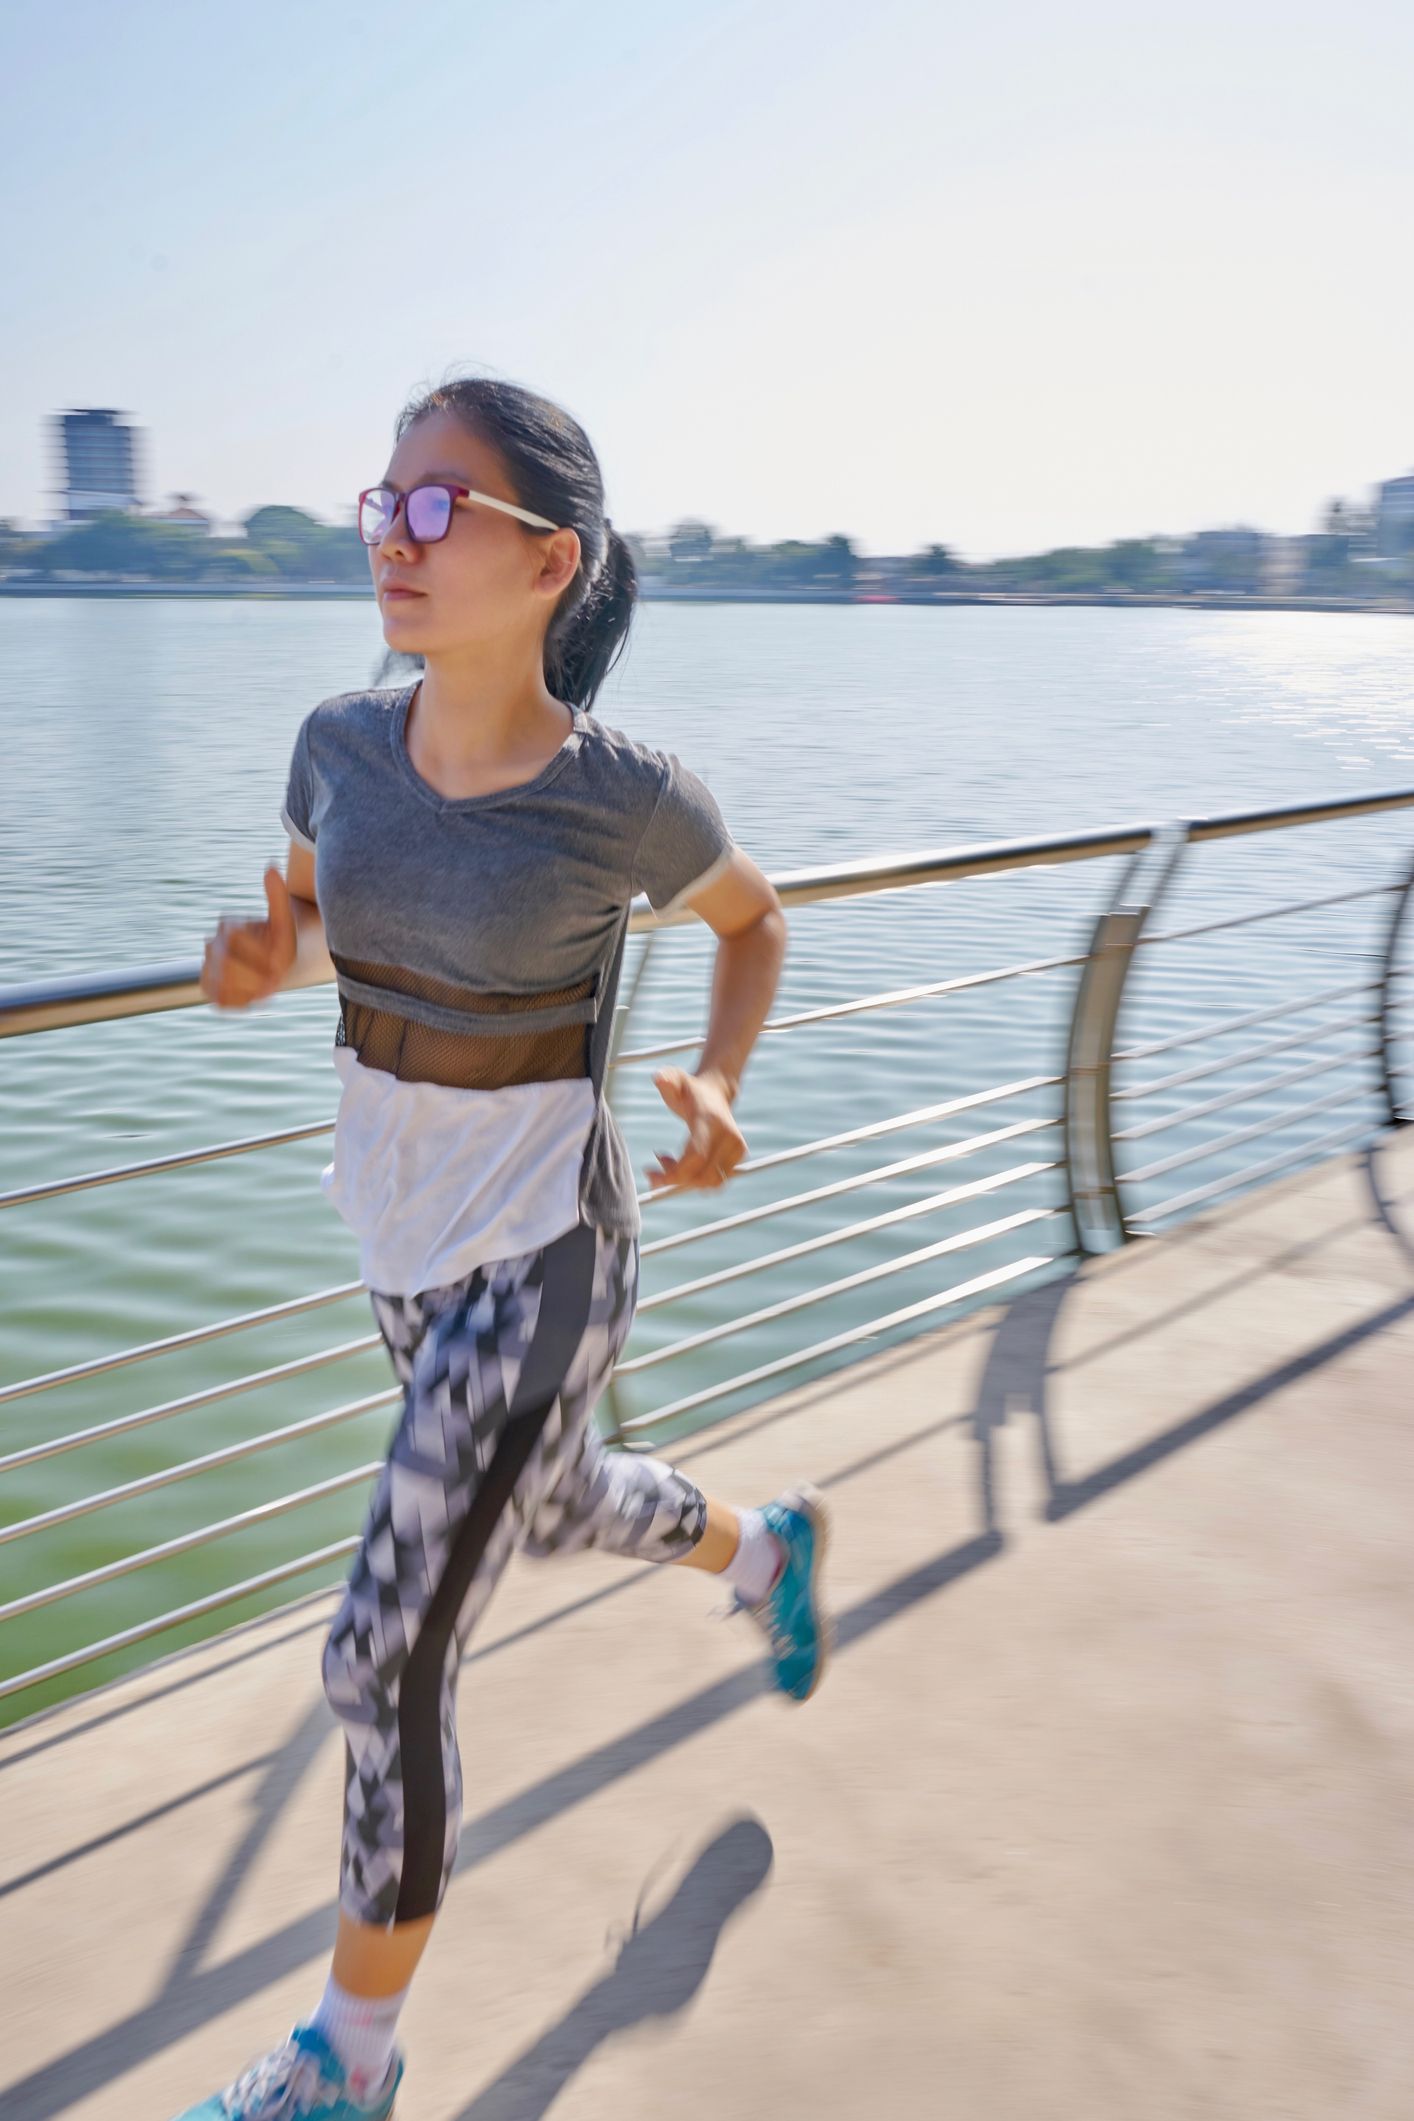 Running With Glasses: Why It's Important and The Best Pairs